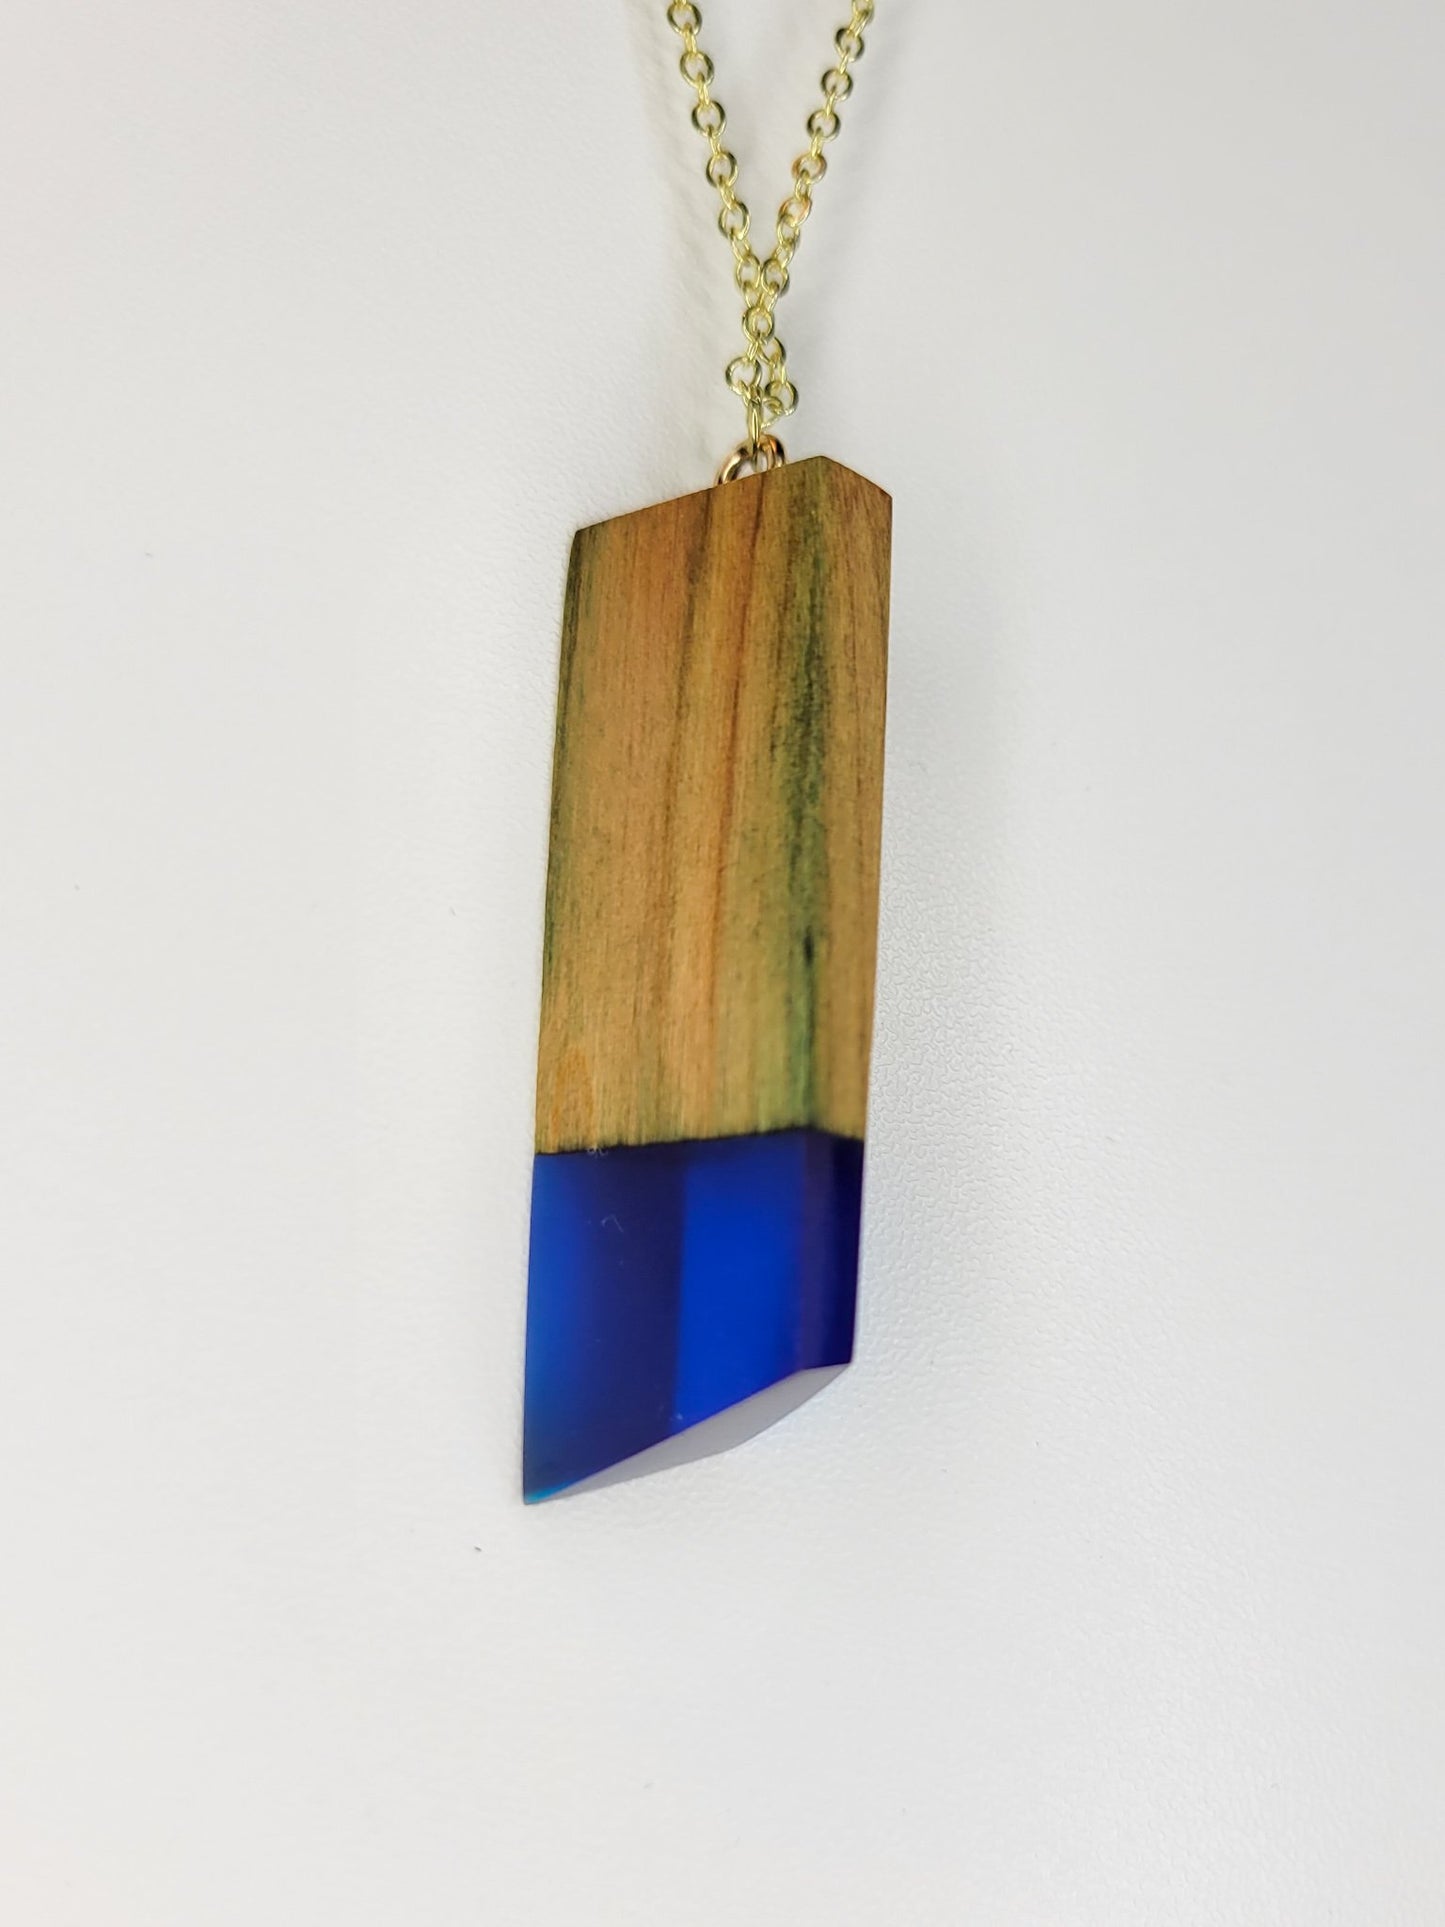 Naturally Fungus-Stained Wooden Pendant With Blue Epoxy